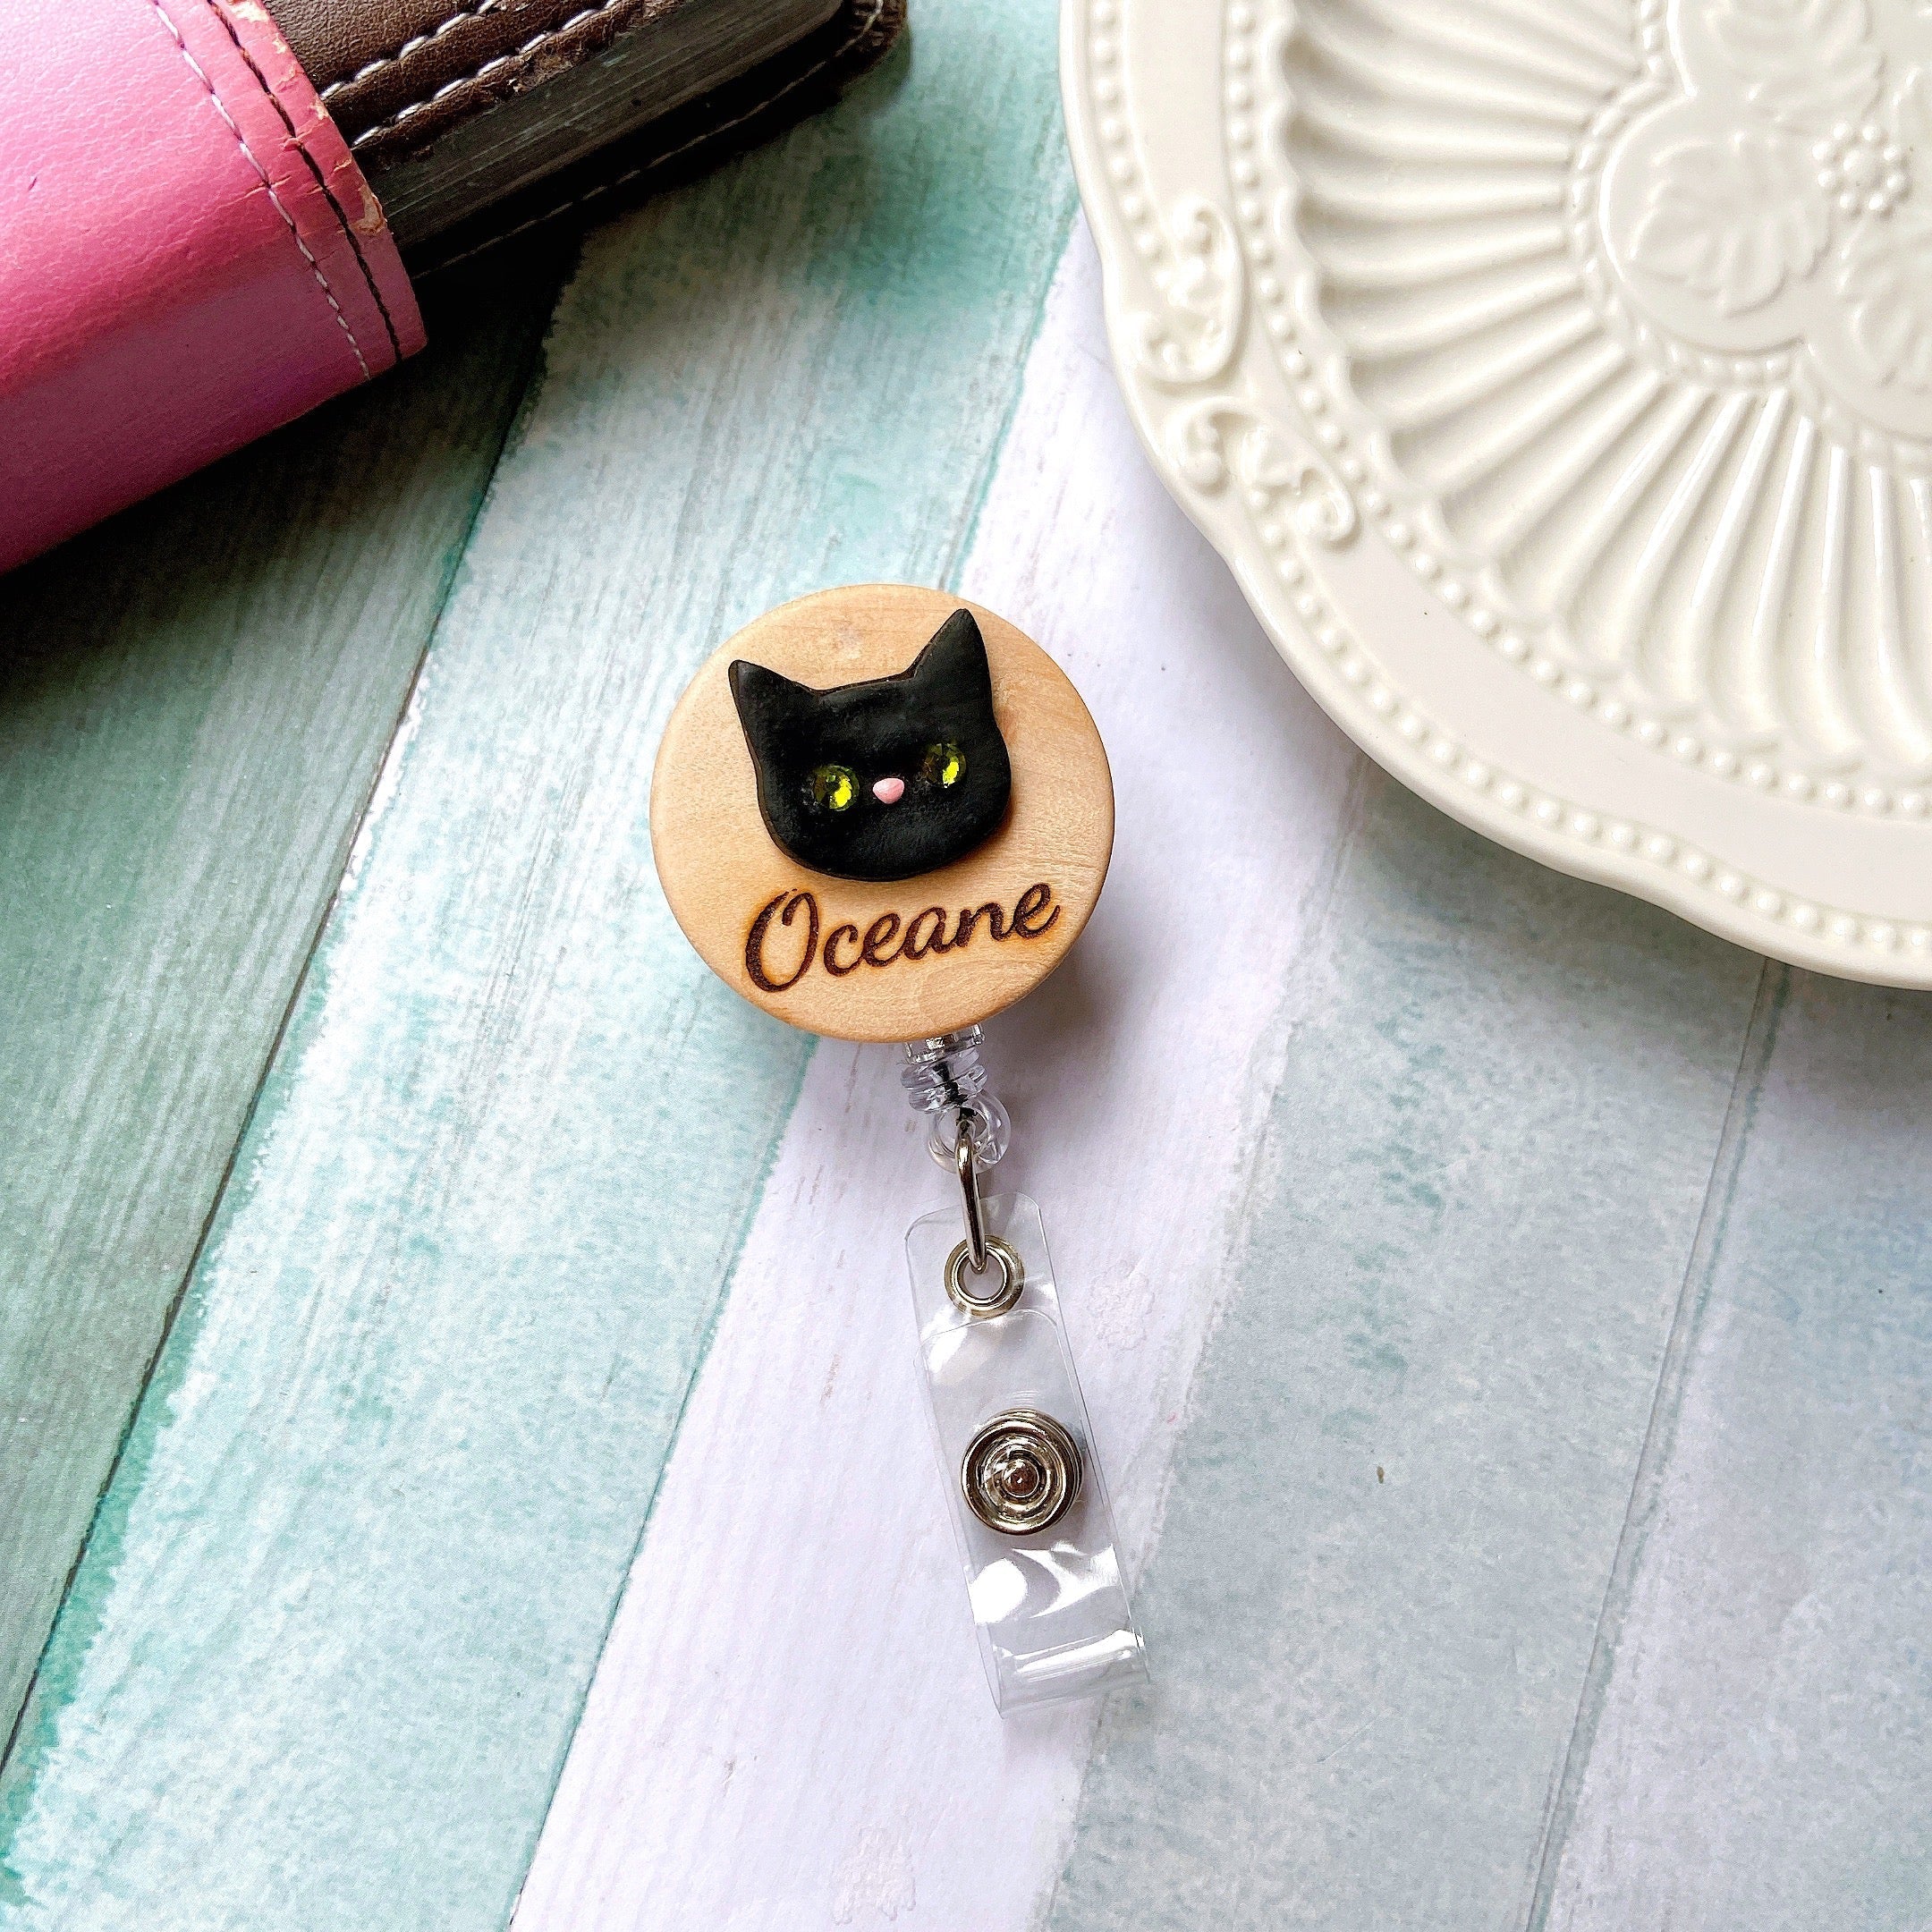  Lovely Black Cat Retractable Badge Reel - Cat ID Holder - Moon Badge  Reel - Kitty in the Moonlight : Handmade Products